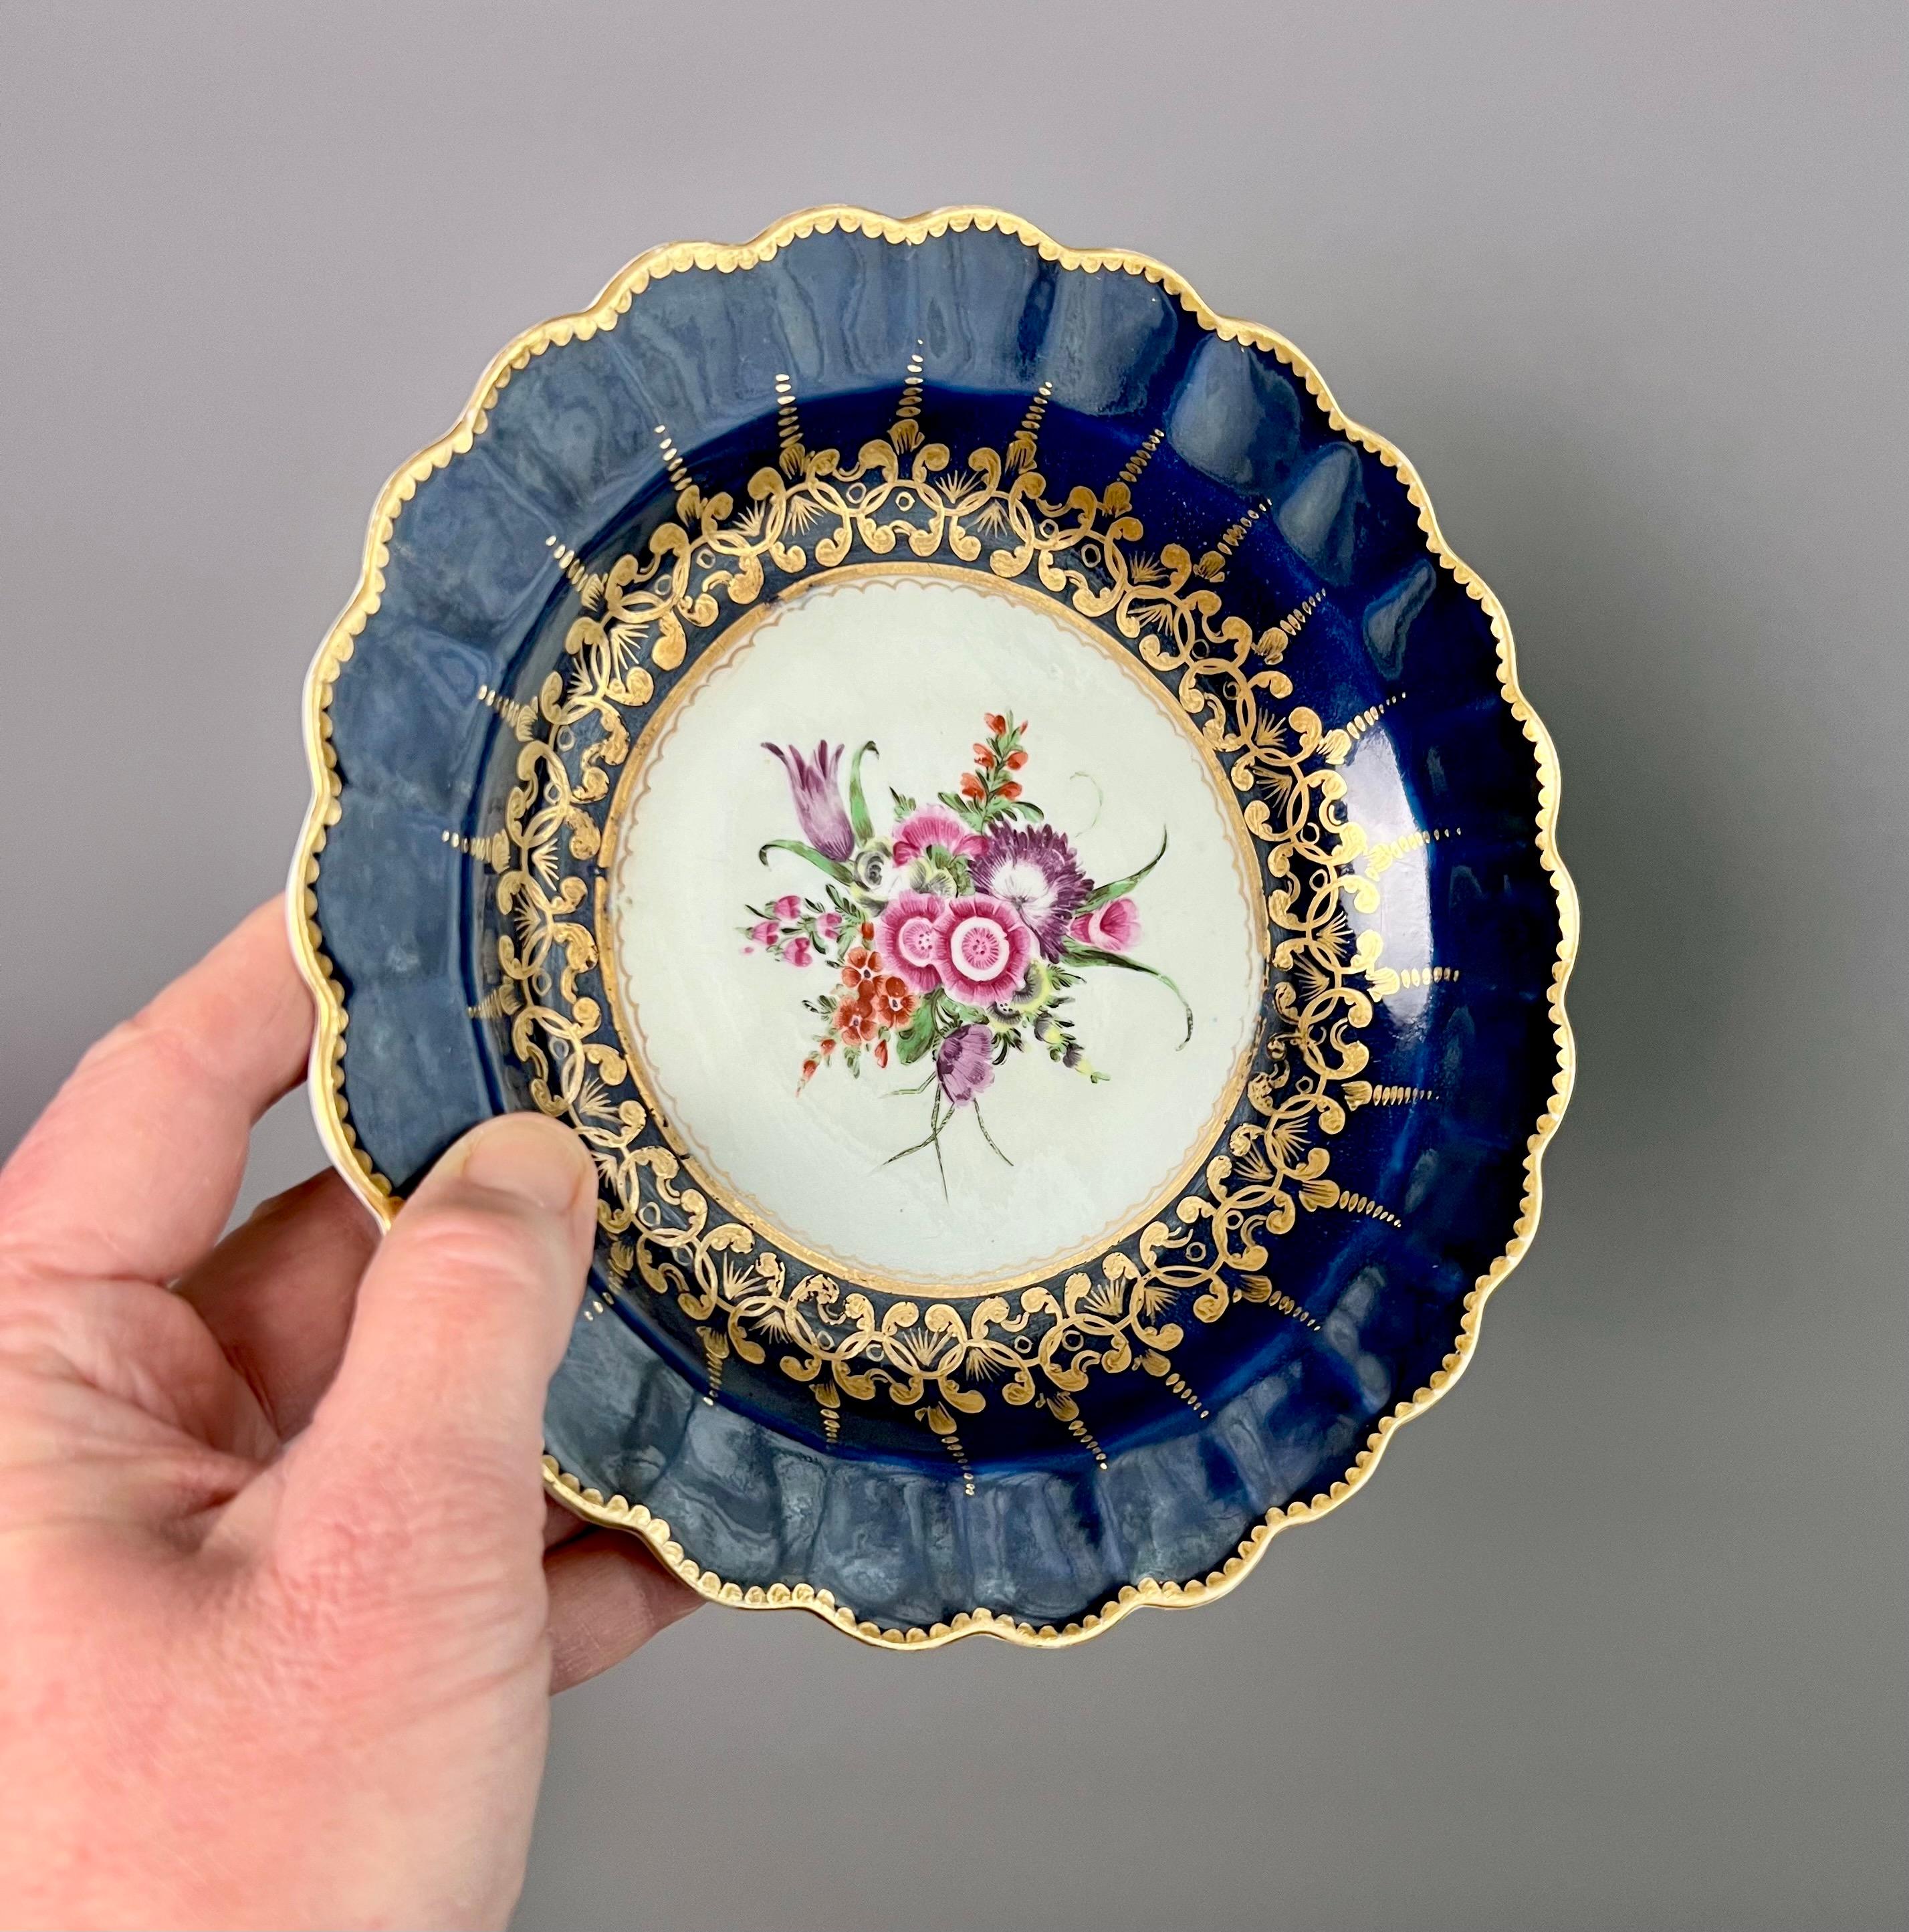 This is a beautiful small plate made by Worcester in about 1770 in their First or the 